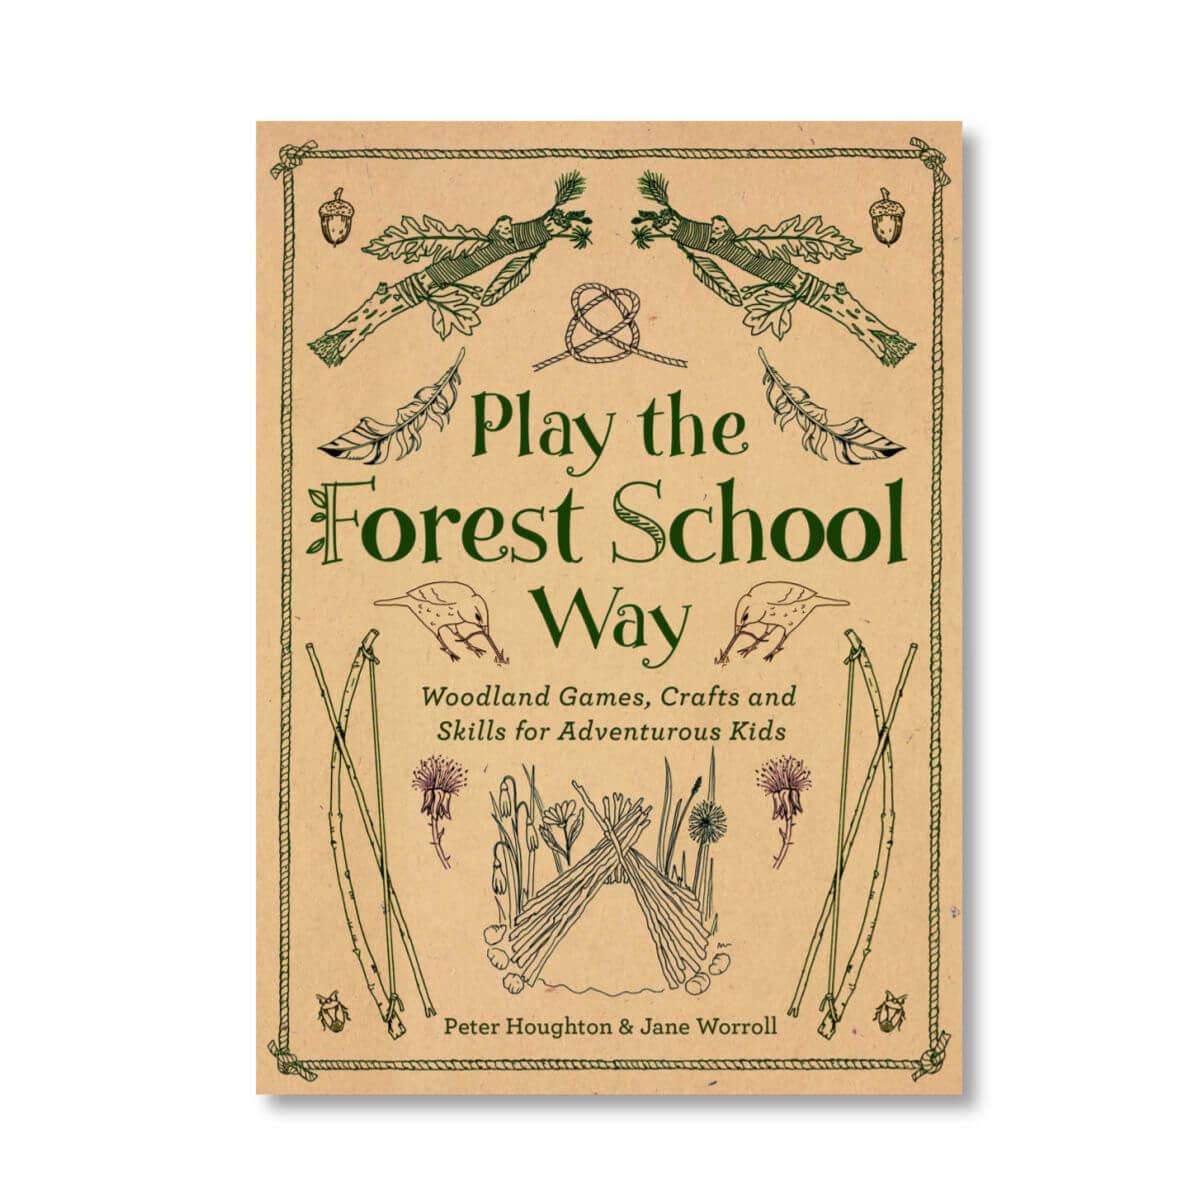 play the forest school way book - woodland games crafts and skills for adventurous kids by Peter Houghton and Jane Worroll